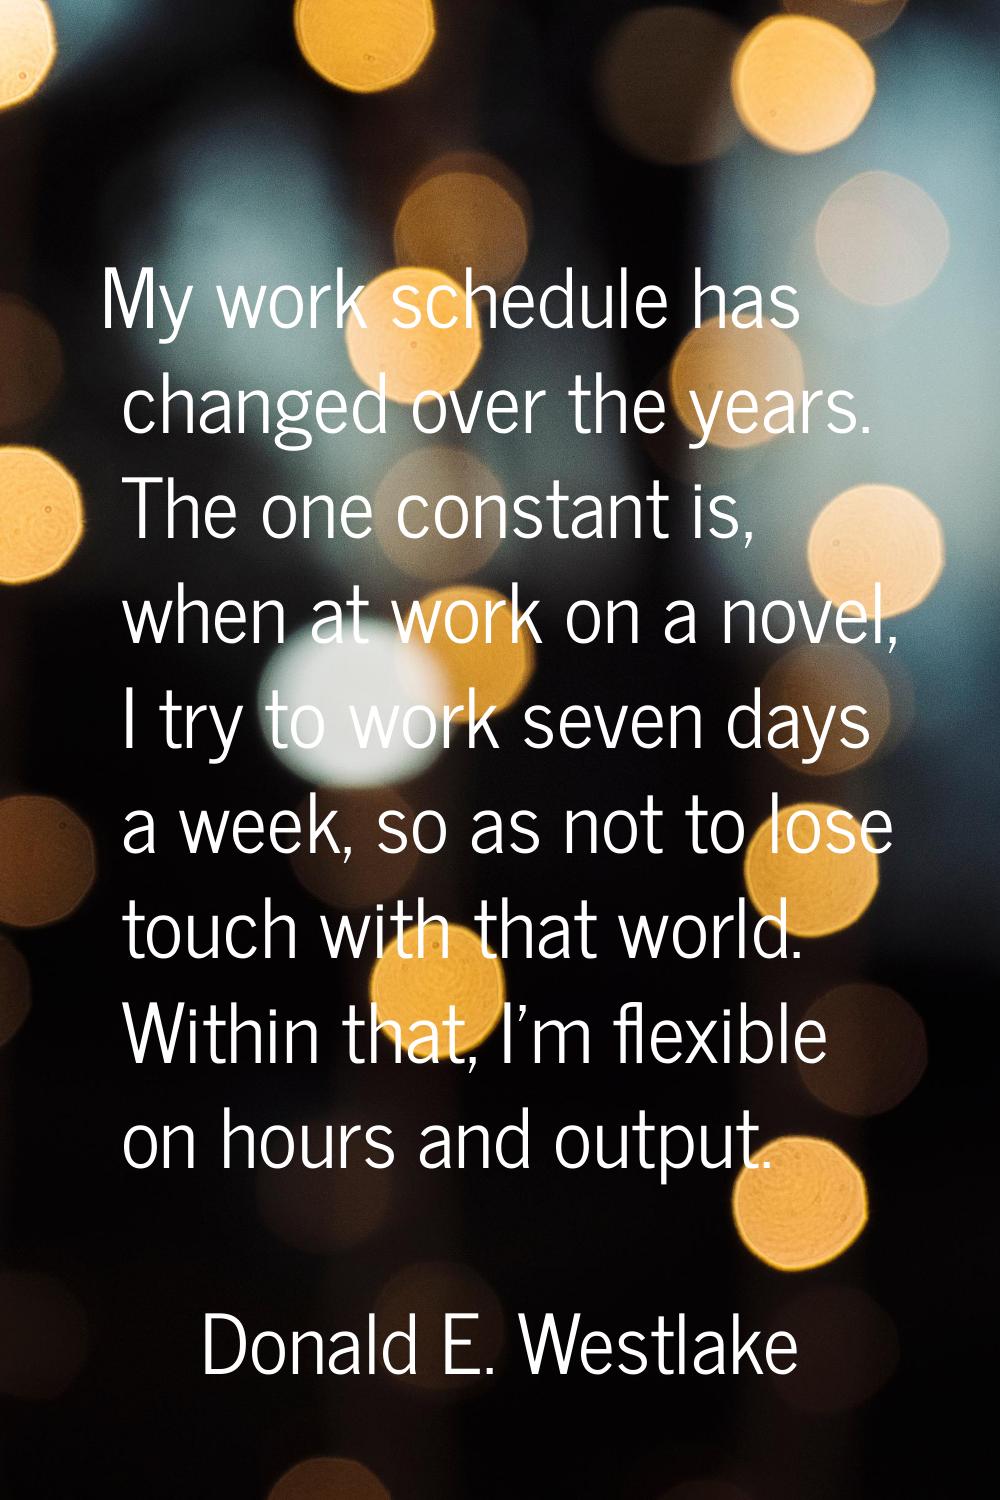 My work schedule has changed over the years. The one constant is, when at work on a novel, I try to